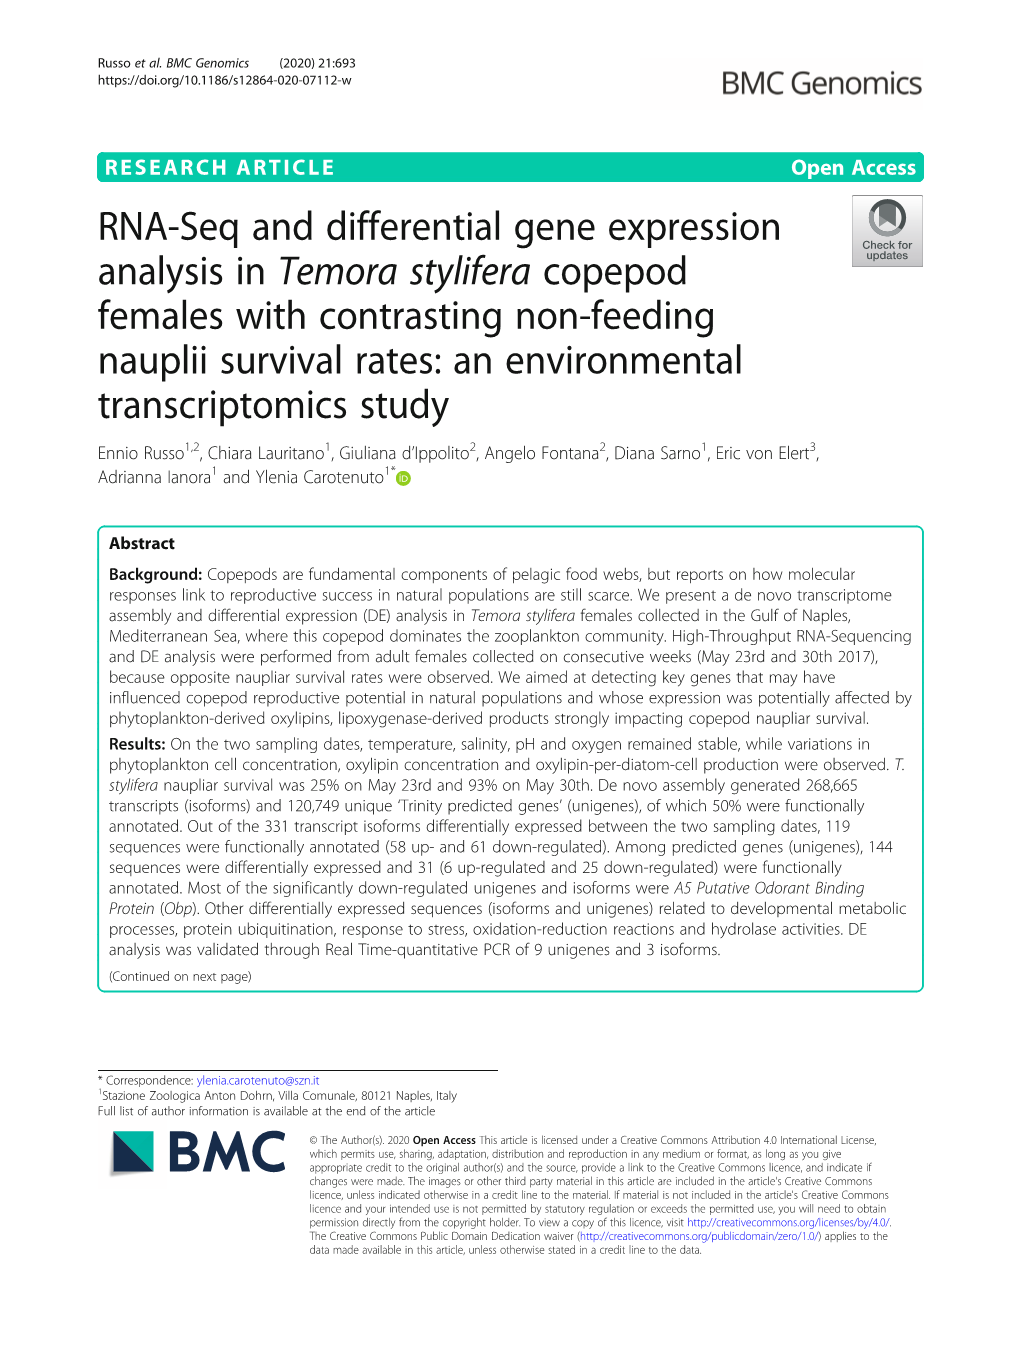 RNA-Seq and Differential Gene Expression Analysis in Temora